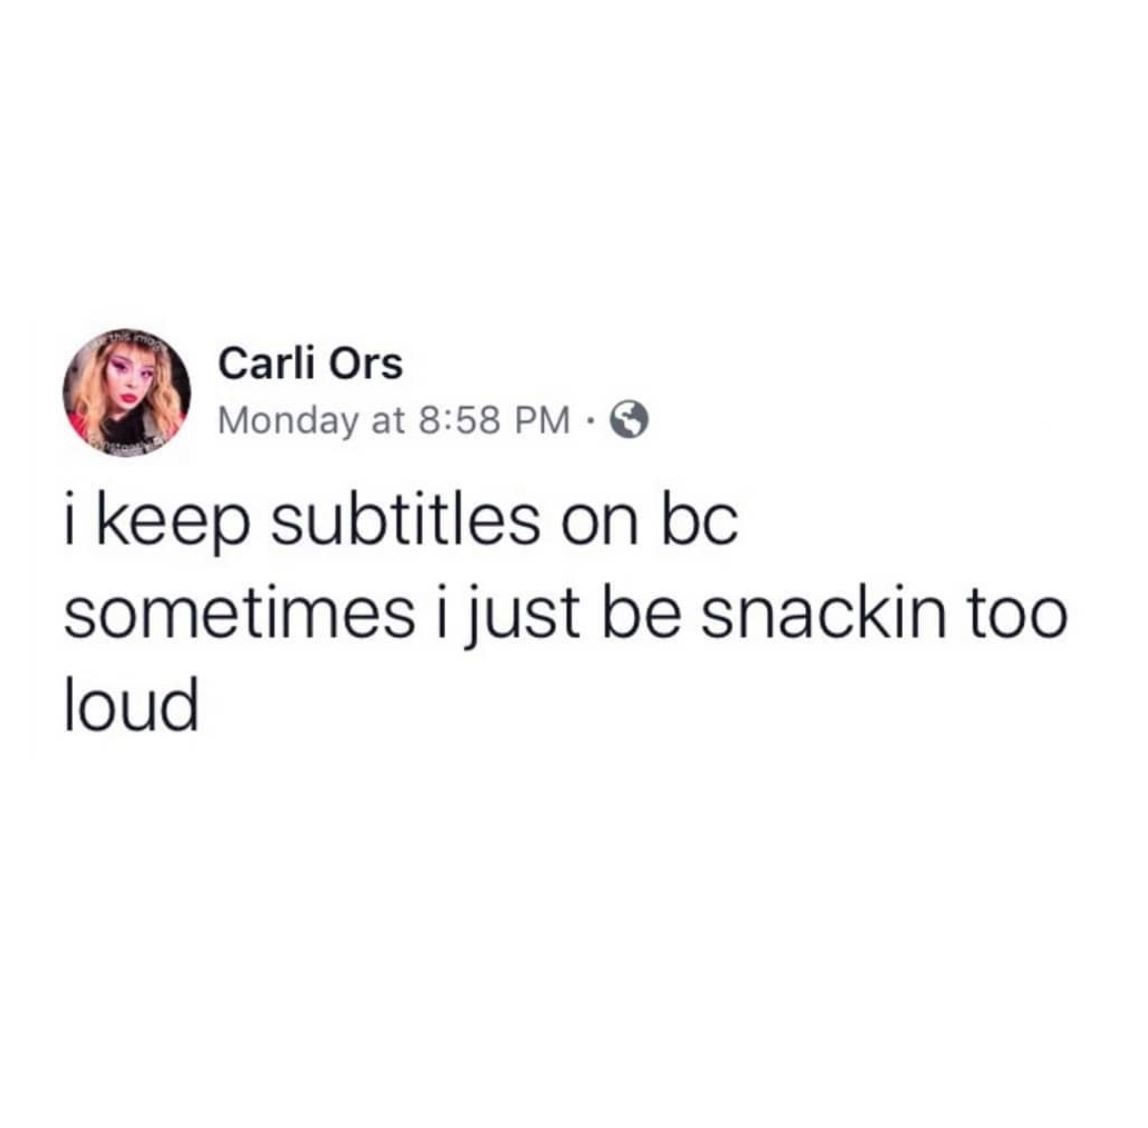 Carli Ors Monday at i keep subtitles on bc sometimes i just be snackin too loud